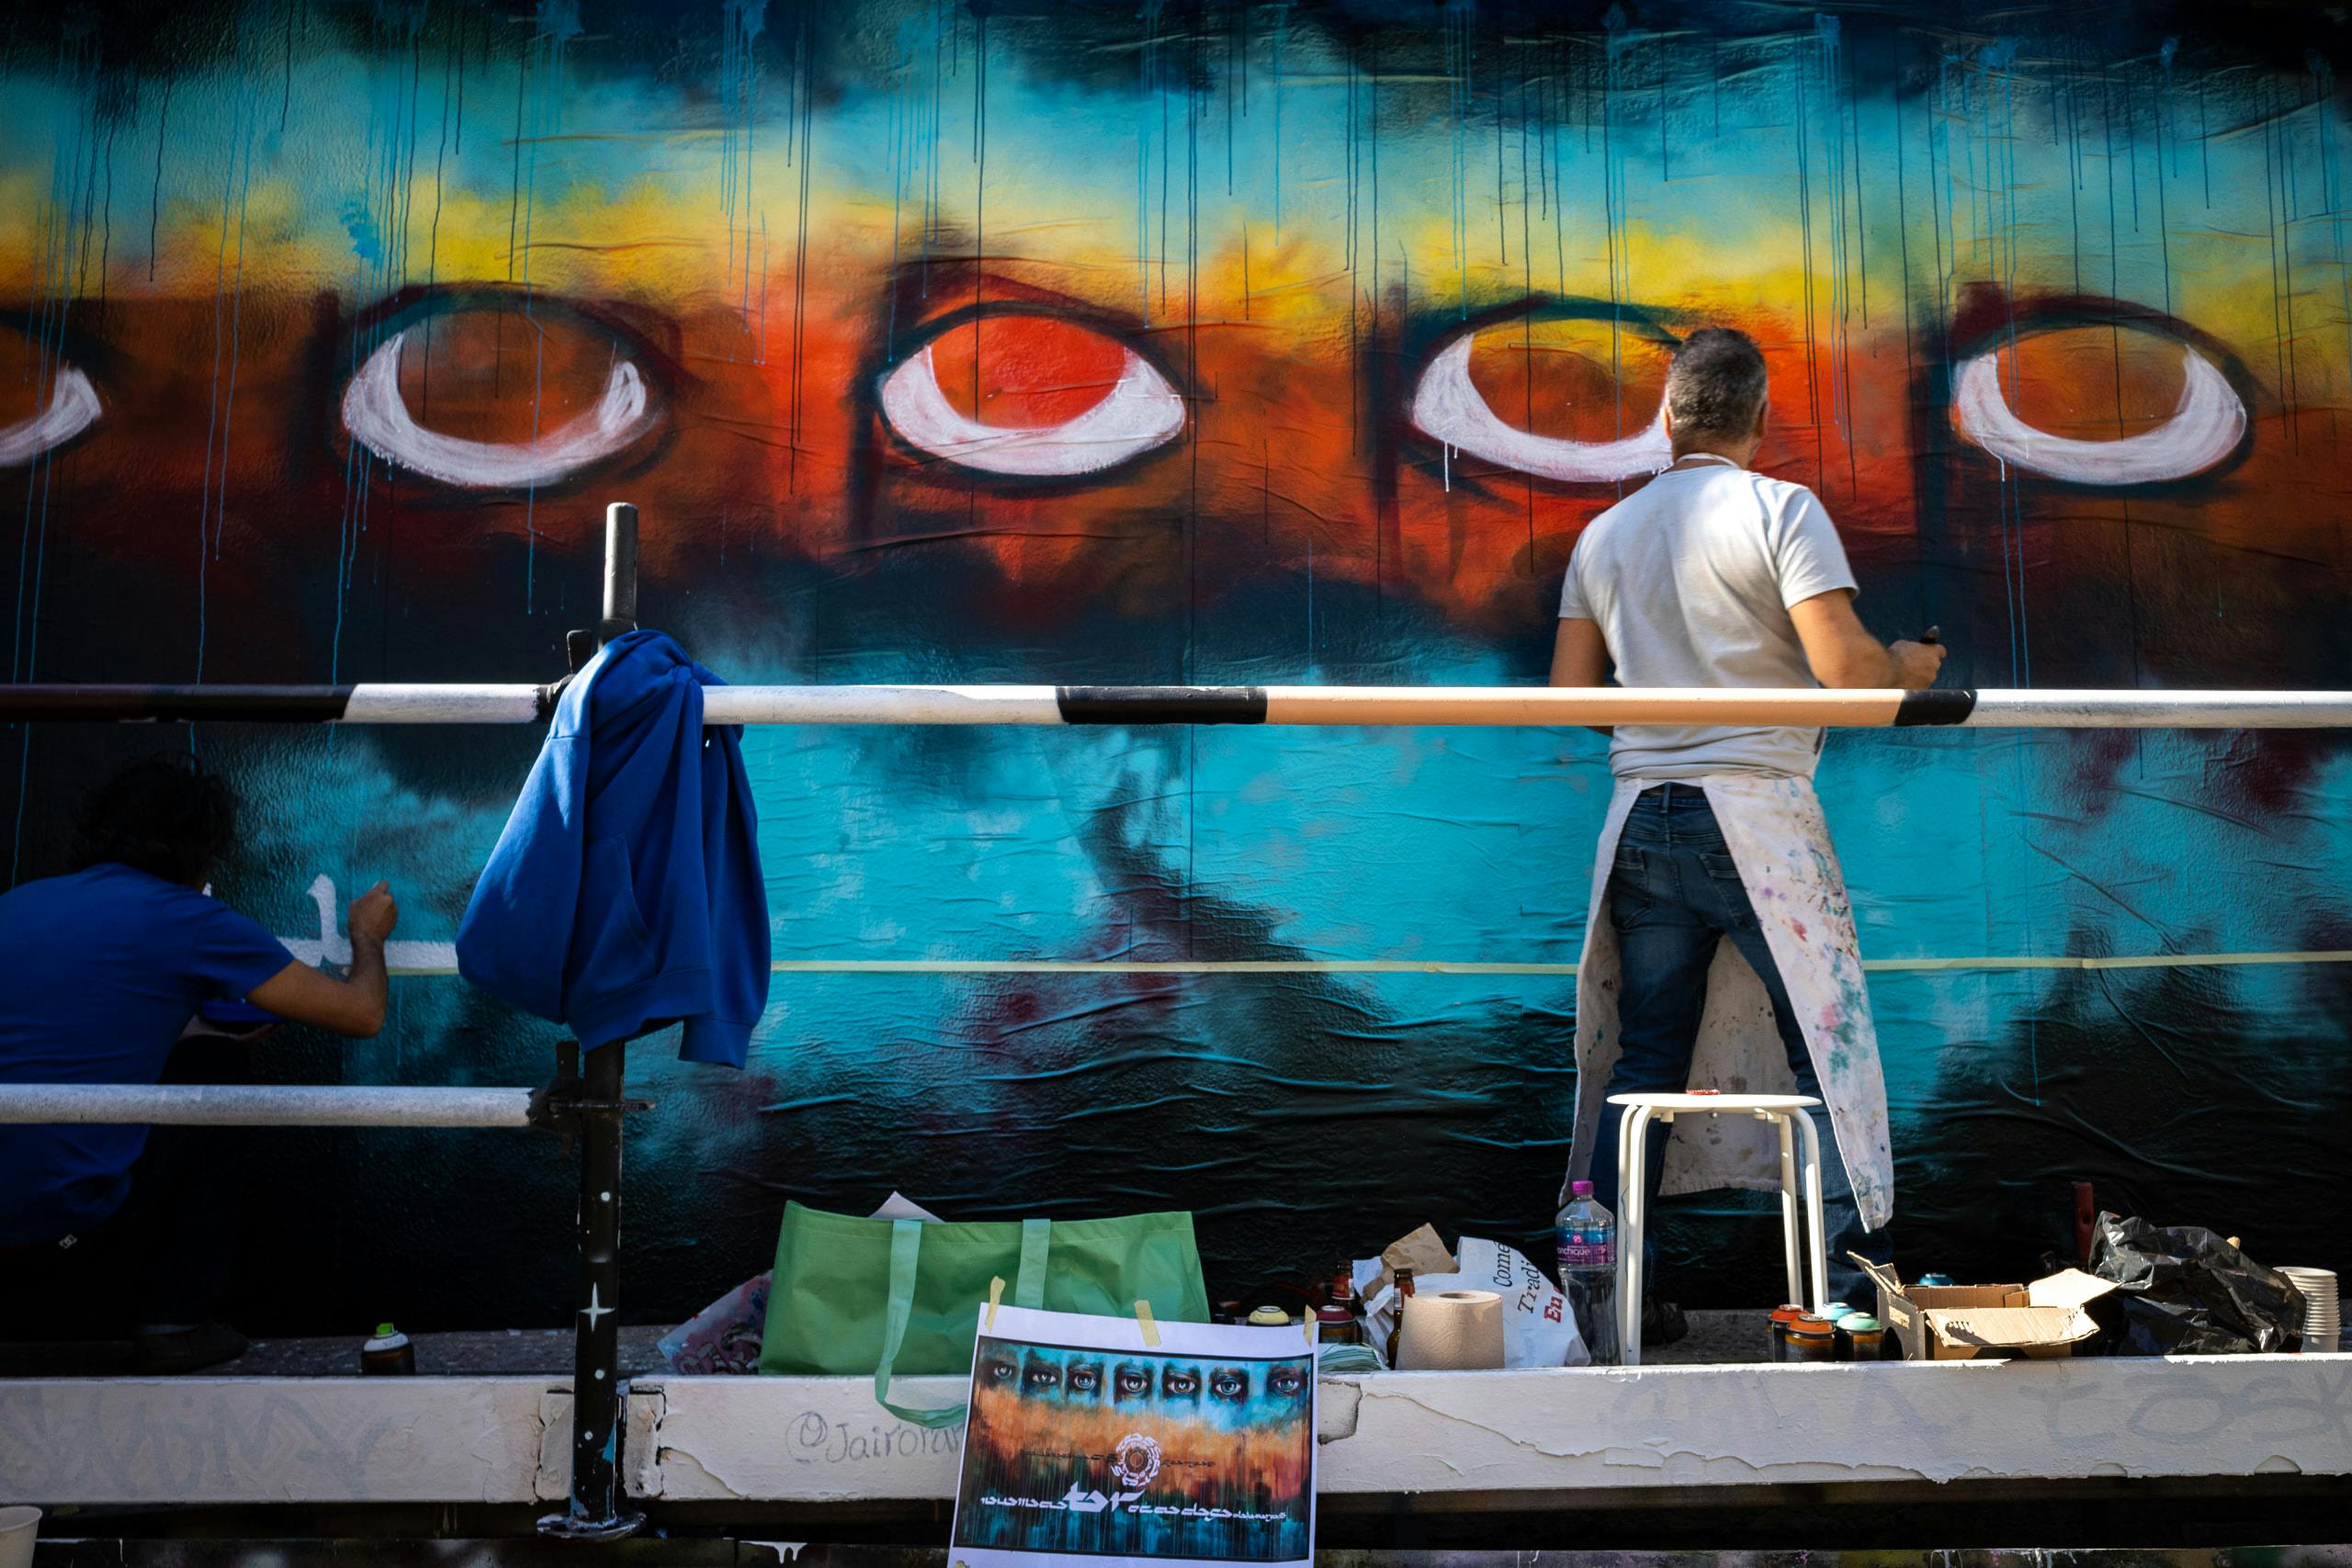 A man painting a mural with 5 eyes